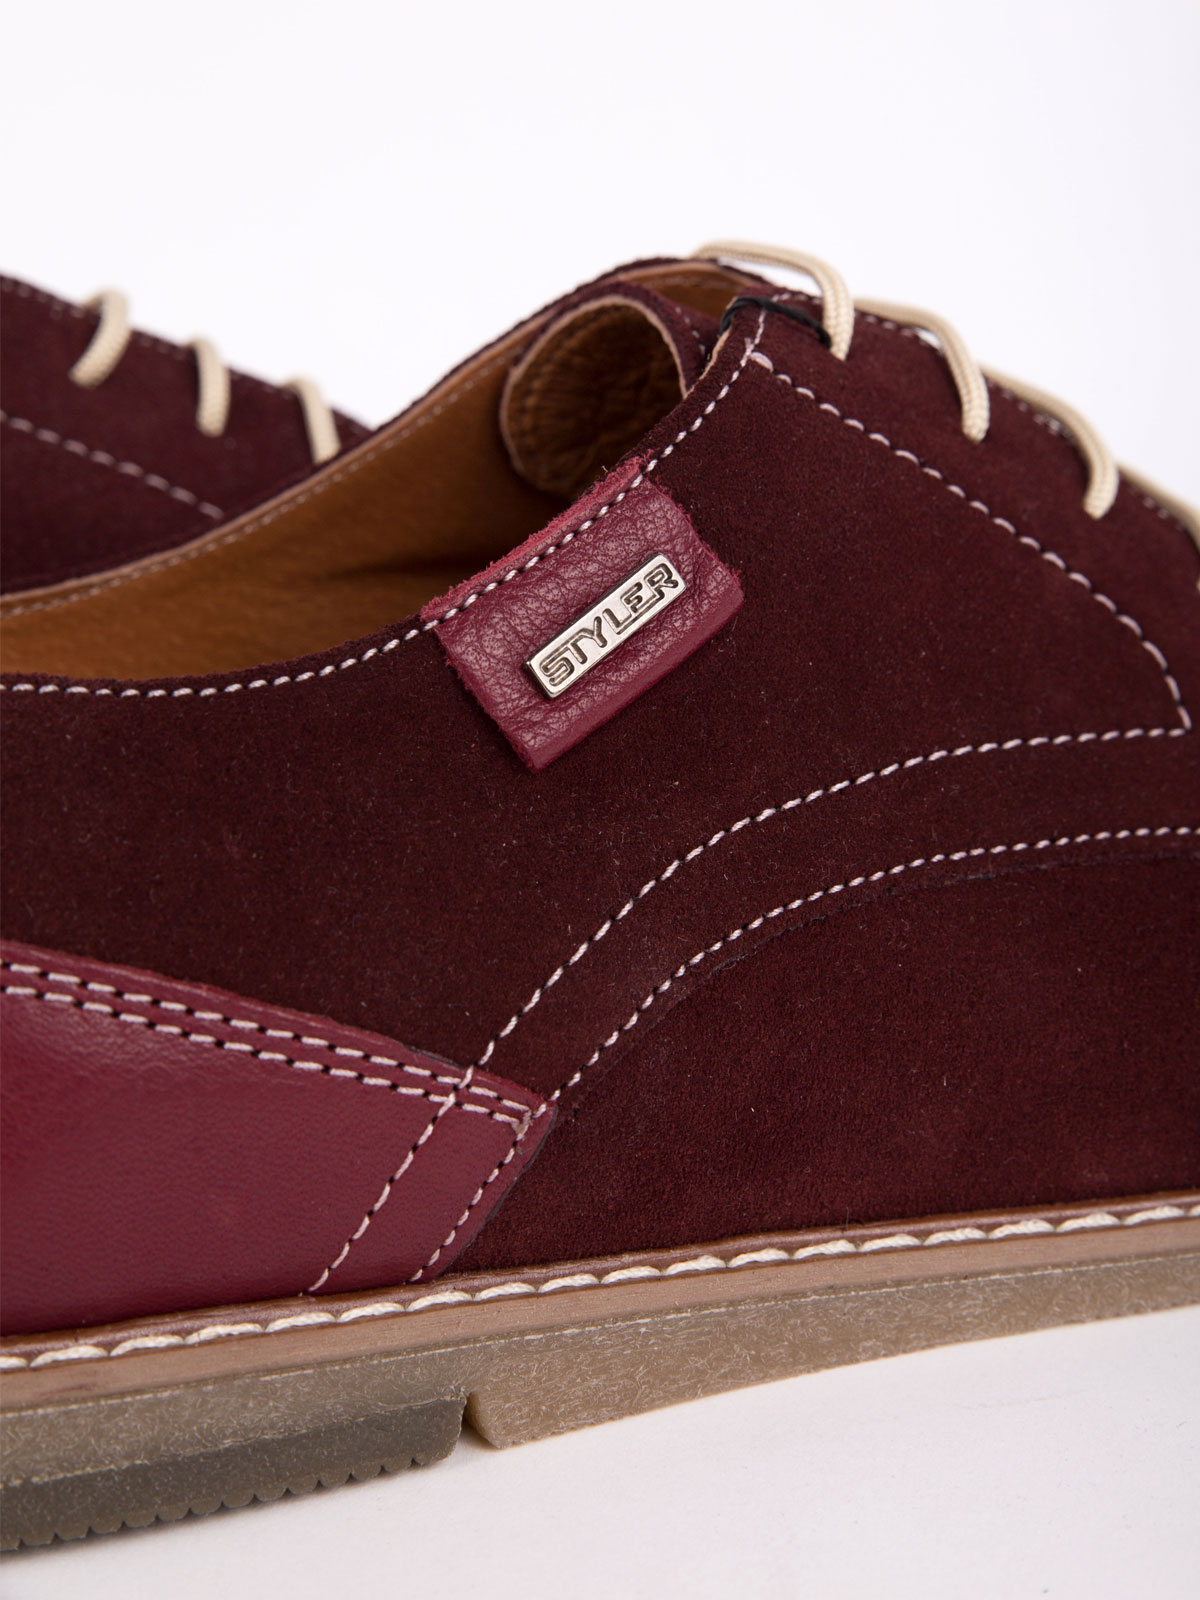 Suede shoes with laces - 81076 - € 50.06 img2